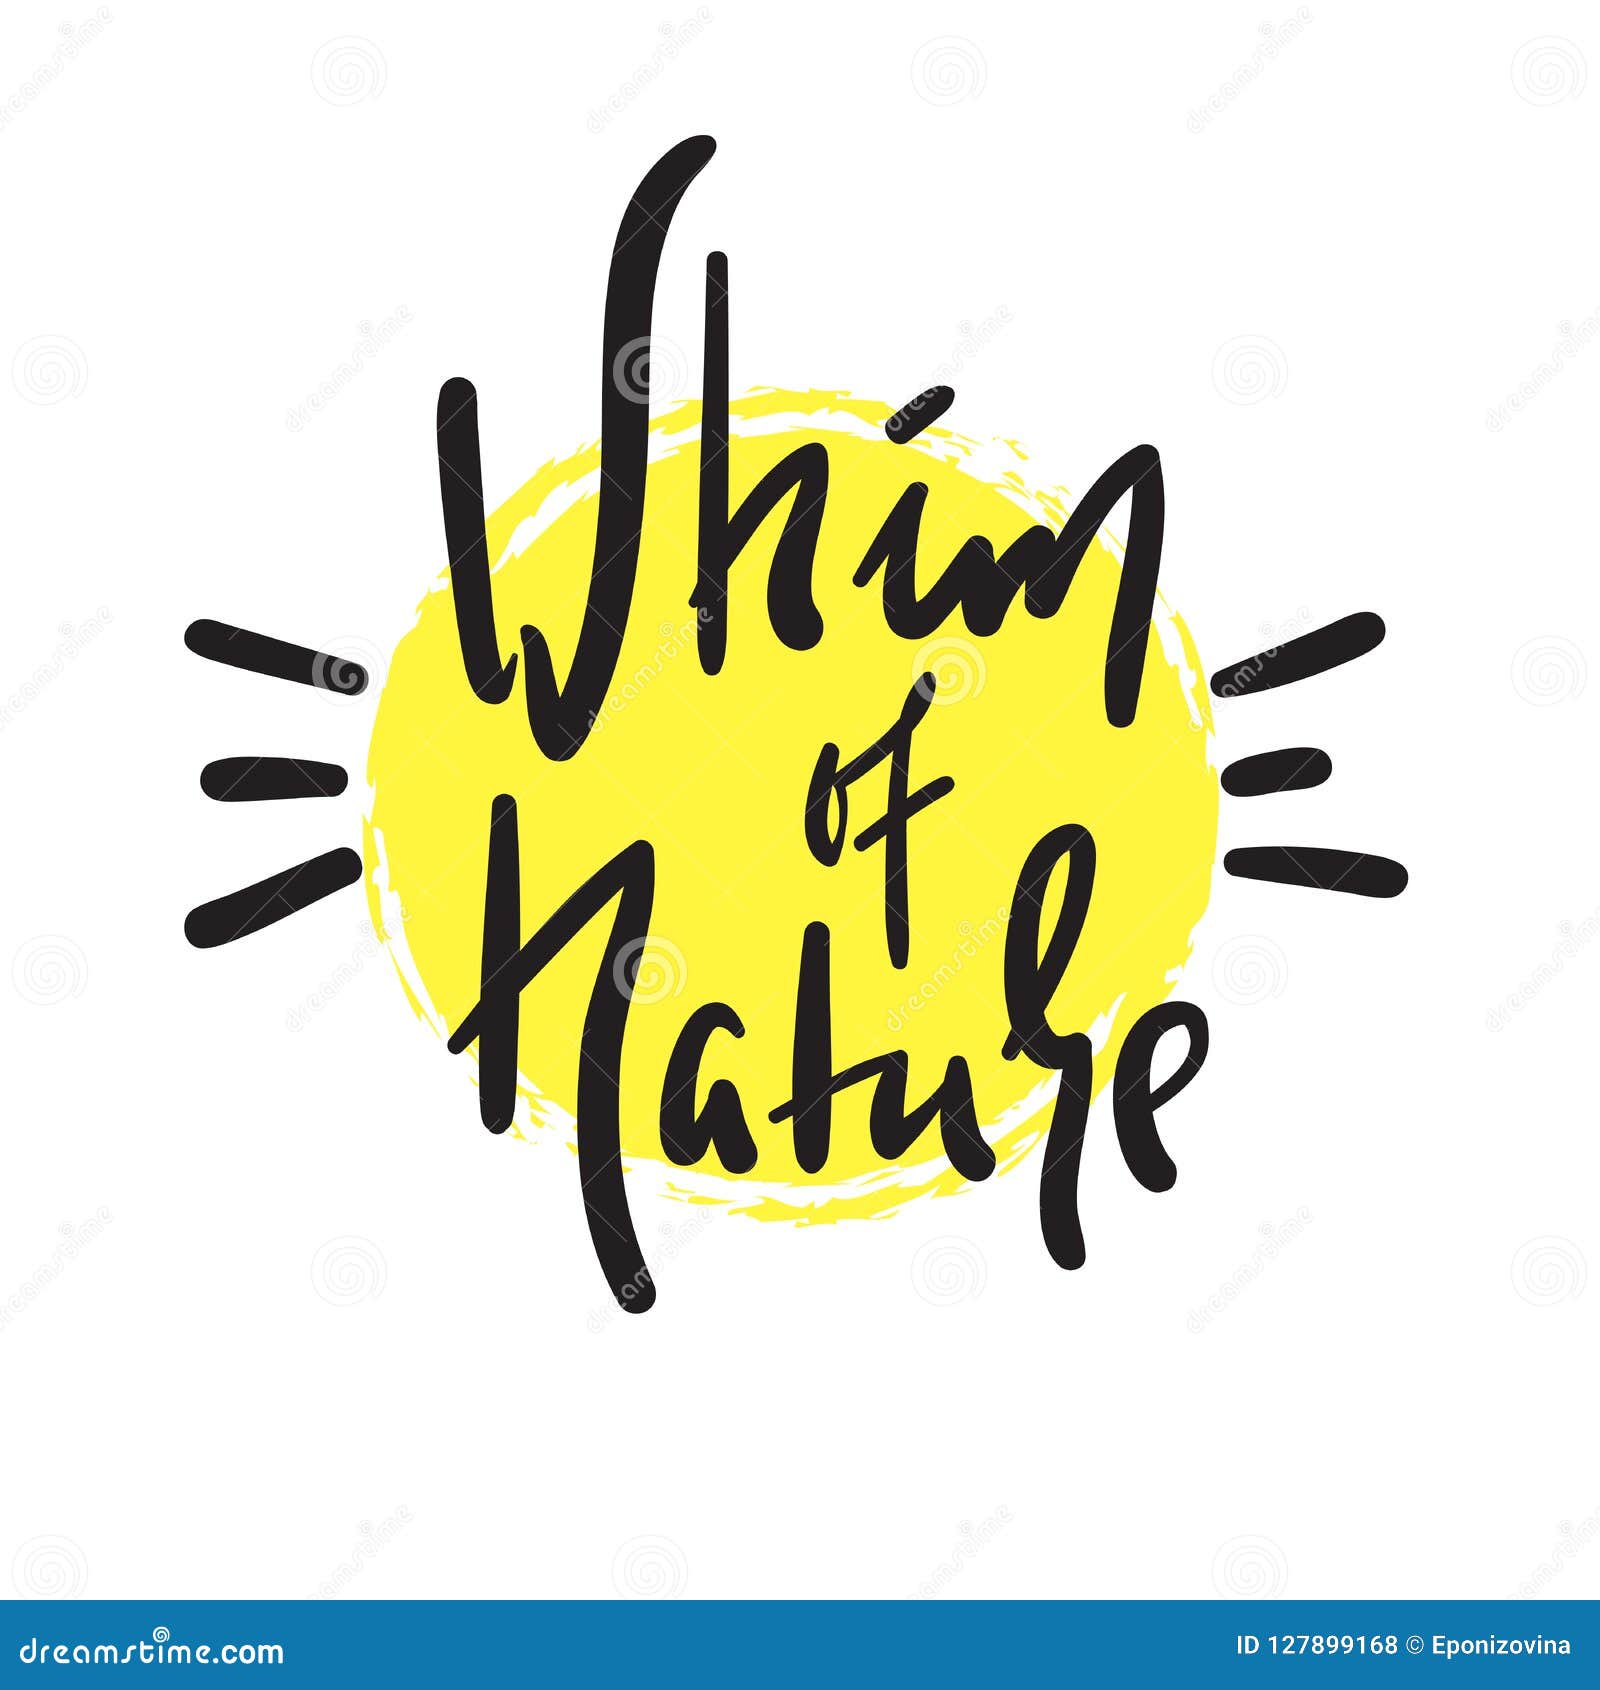 whim of nature - simple inspire and motivational quote. hand drawn beautiful lettering. print for inspirational poster, t-shirt, b